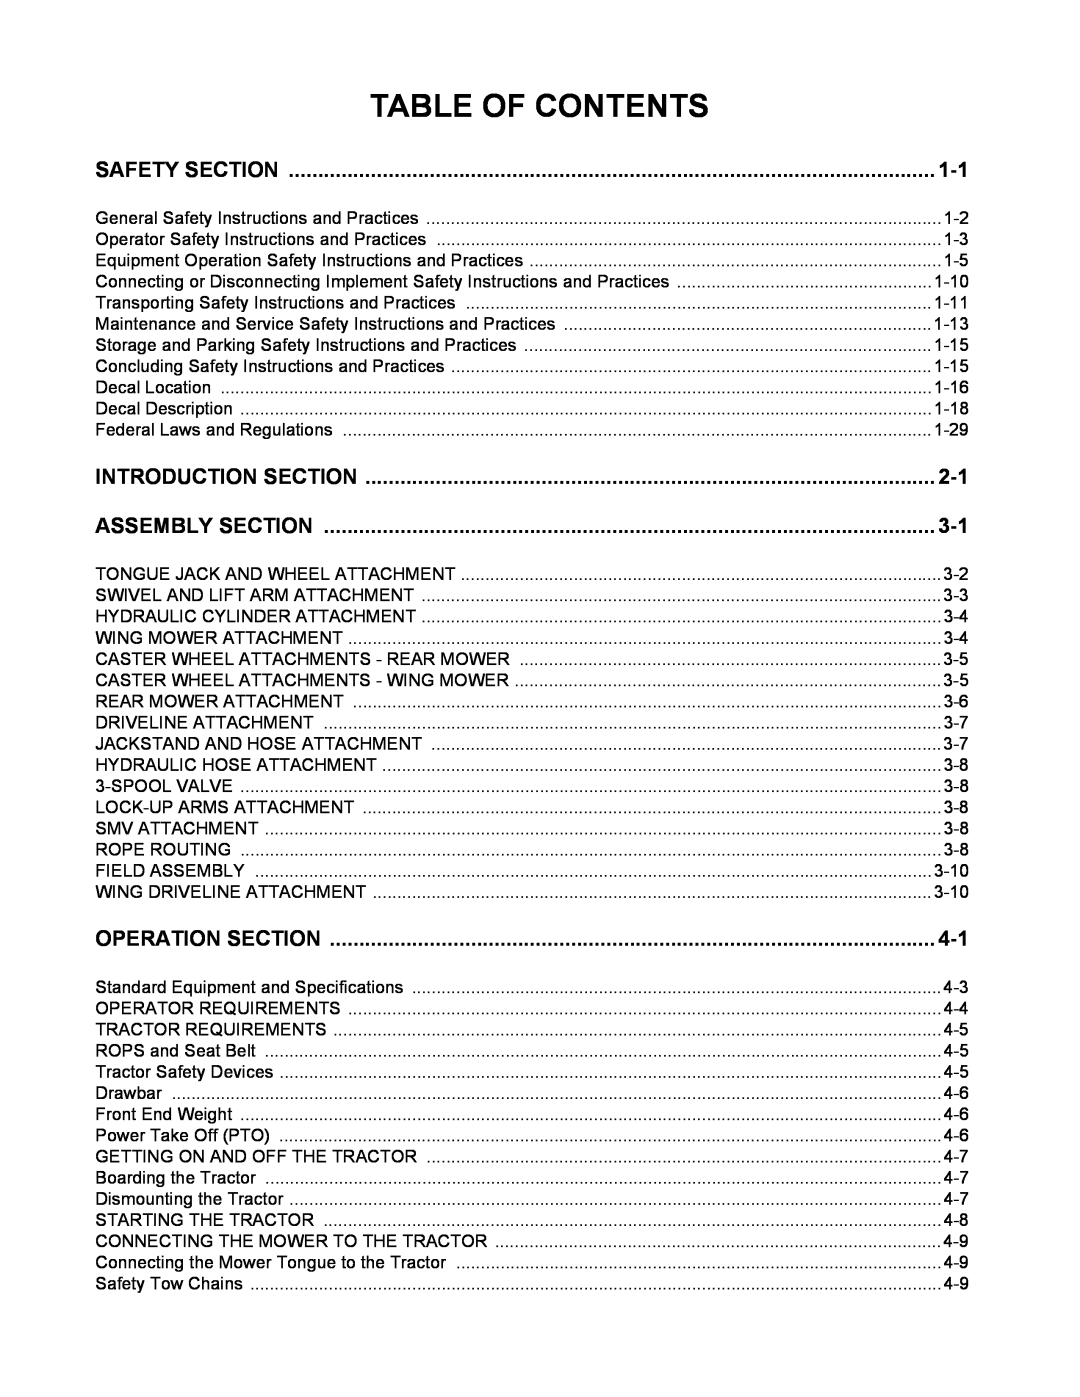 Alamo TX235 manual Table Of Contents, Safety Section, Introduction Section, Assembly Section, Operation Section 